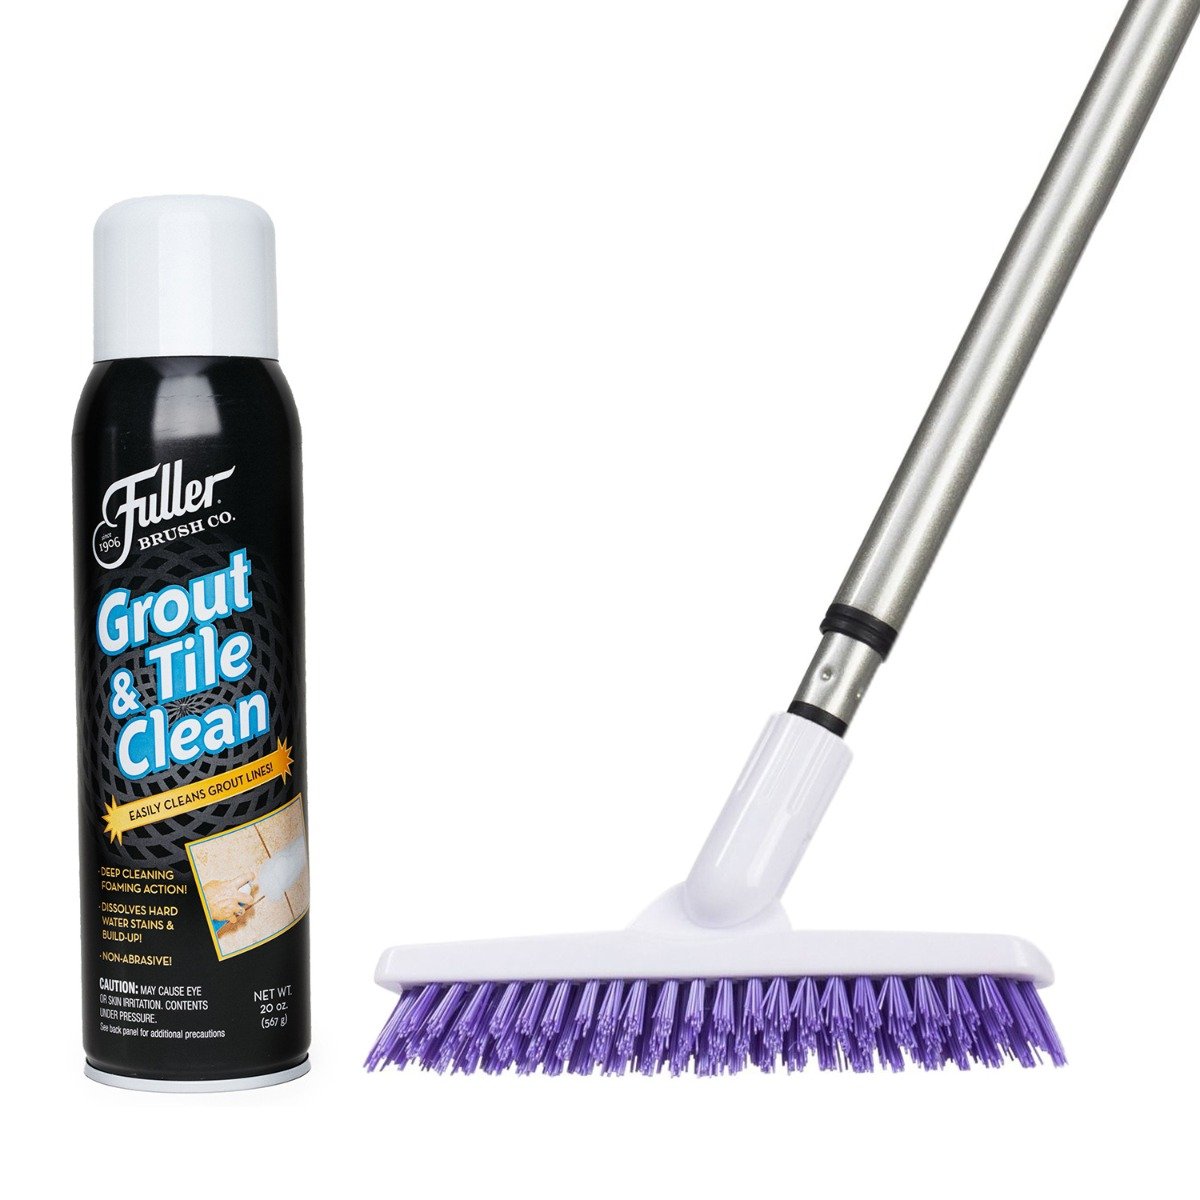 Fuginator Grout Brush Quickly Simply and Thoroughly Cleans Grout Joints